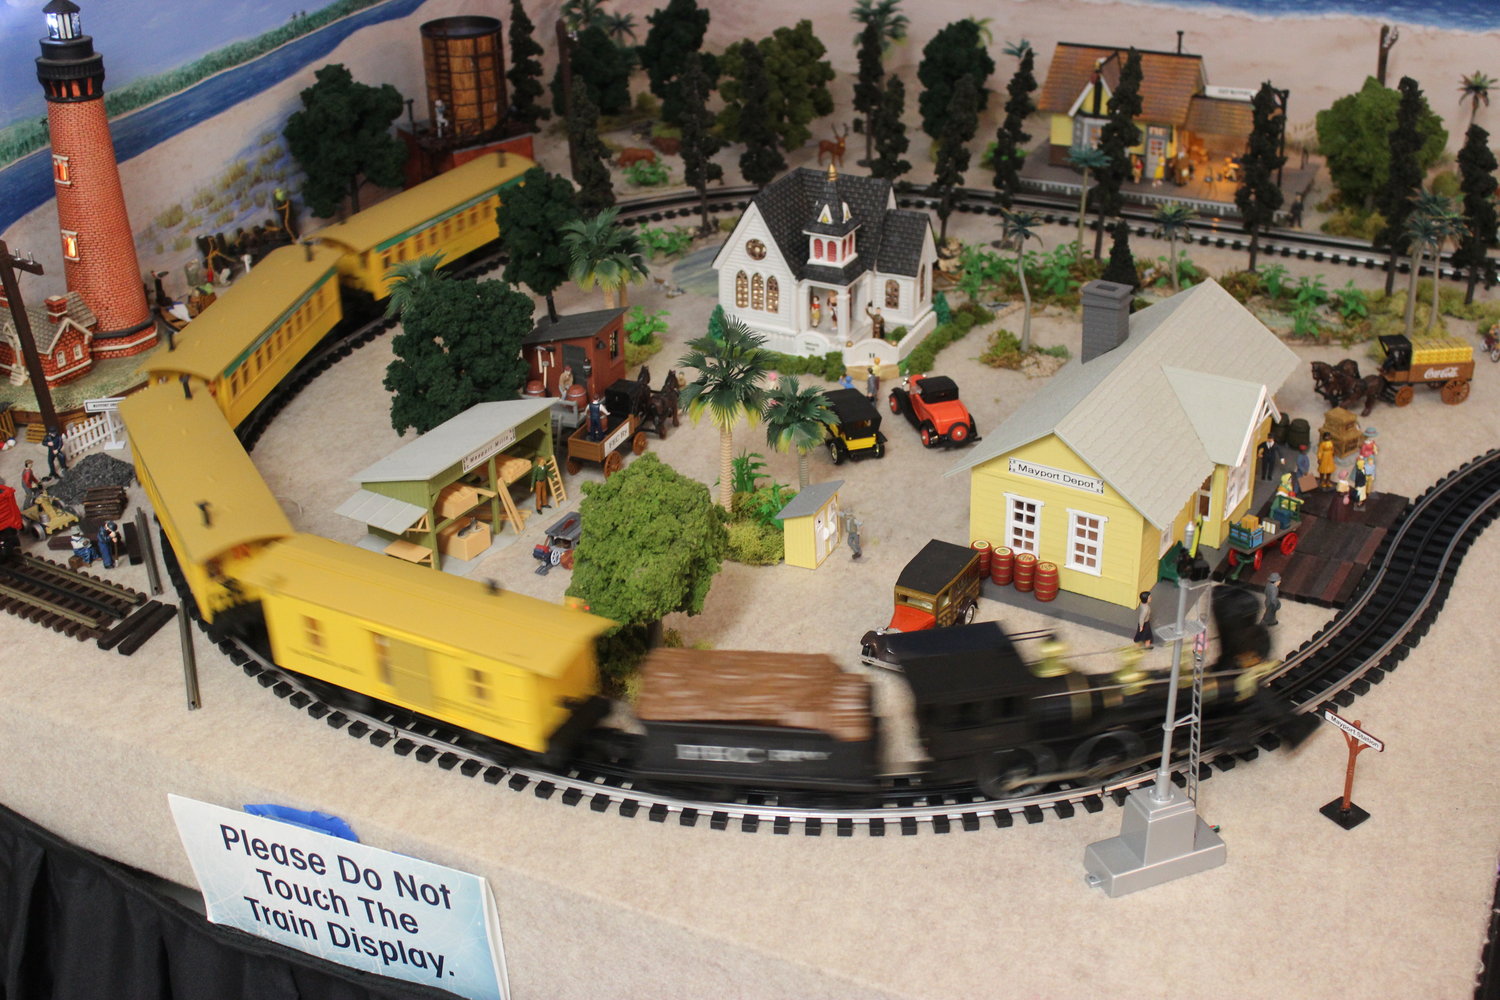 A model train took visitors on an imaginary tour of the Beaches.